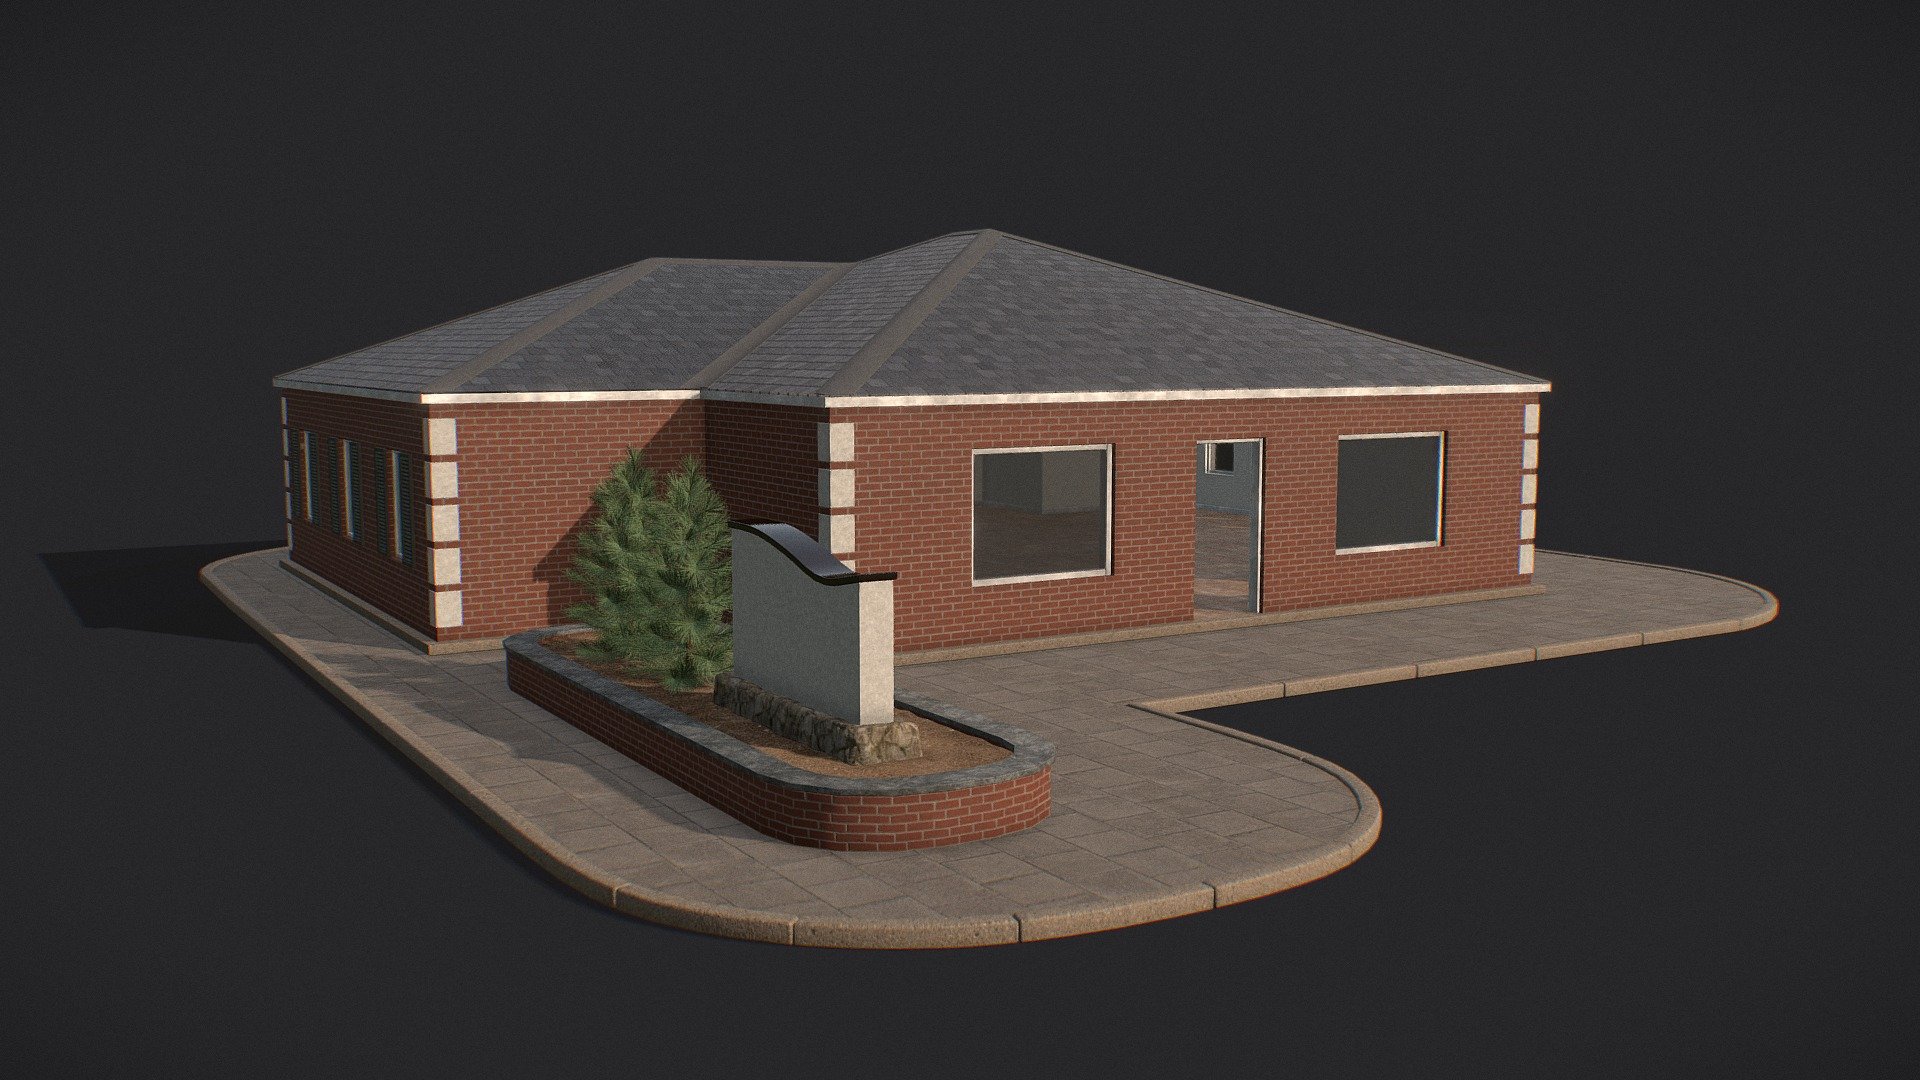 Another shell of a building. This time I added a garden plot with a sign and bushes. The bushes aren't really optimized at all so they add about 100k verts, but with the way I built the plot it looks empty without some vegetation there. So, you've been warned.


The textures used:
 

Brick Exterior- https://www.textures.com/download/3DScans0115/132042 

Concrete Decor- https://www.textures.com/download/PBR0314/136345

Sidealk- https://www.textures.com/download/3DScans0450/133746

Concrete Base- https://www.textures.com/download/3DScans0036/126986

Roof- https://www.textures.com/download/PBR0409/137453

Wood Trim- https://www.textures.com/download/PBR0843/139500

Dirt- https://texturehaven.com/tex/?c=terrain&amp;t=forrest_ground_03

Floor Tiles- https://texturehaven.com/tex/?c=floor&amp;t=tiled_floor_001

Ceiling- https://ambientcg.com/view?id=OfficeCeiling002



Lightmap UV's are on channel 1 - Textured Commercial Building - Download Free 3D model by Lodgelus 3d model